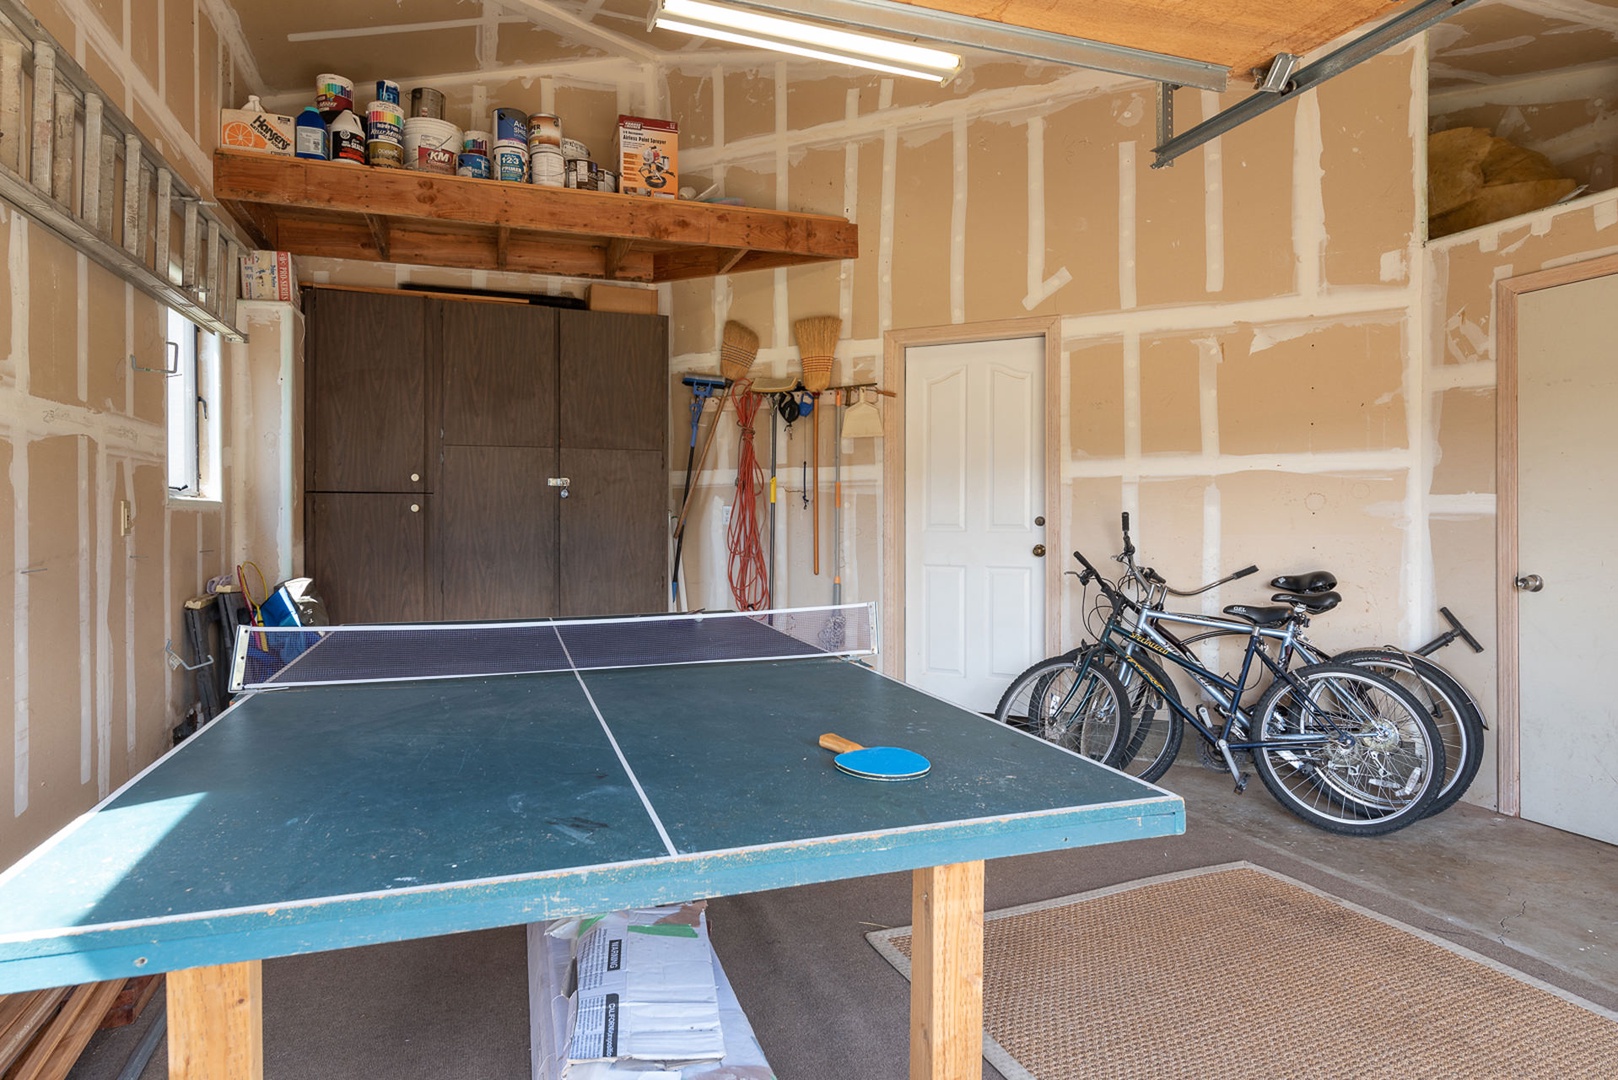 Ping pong table in the garage